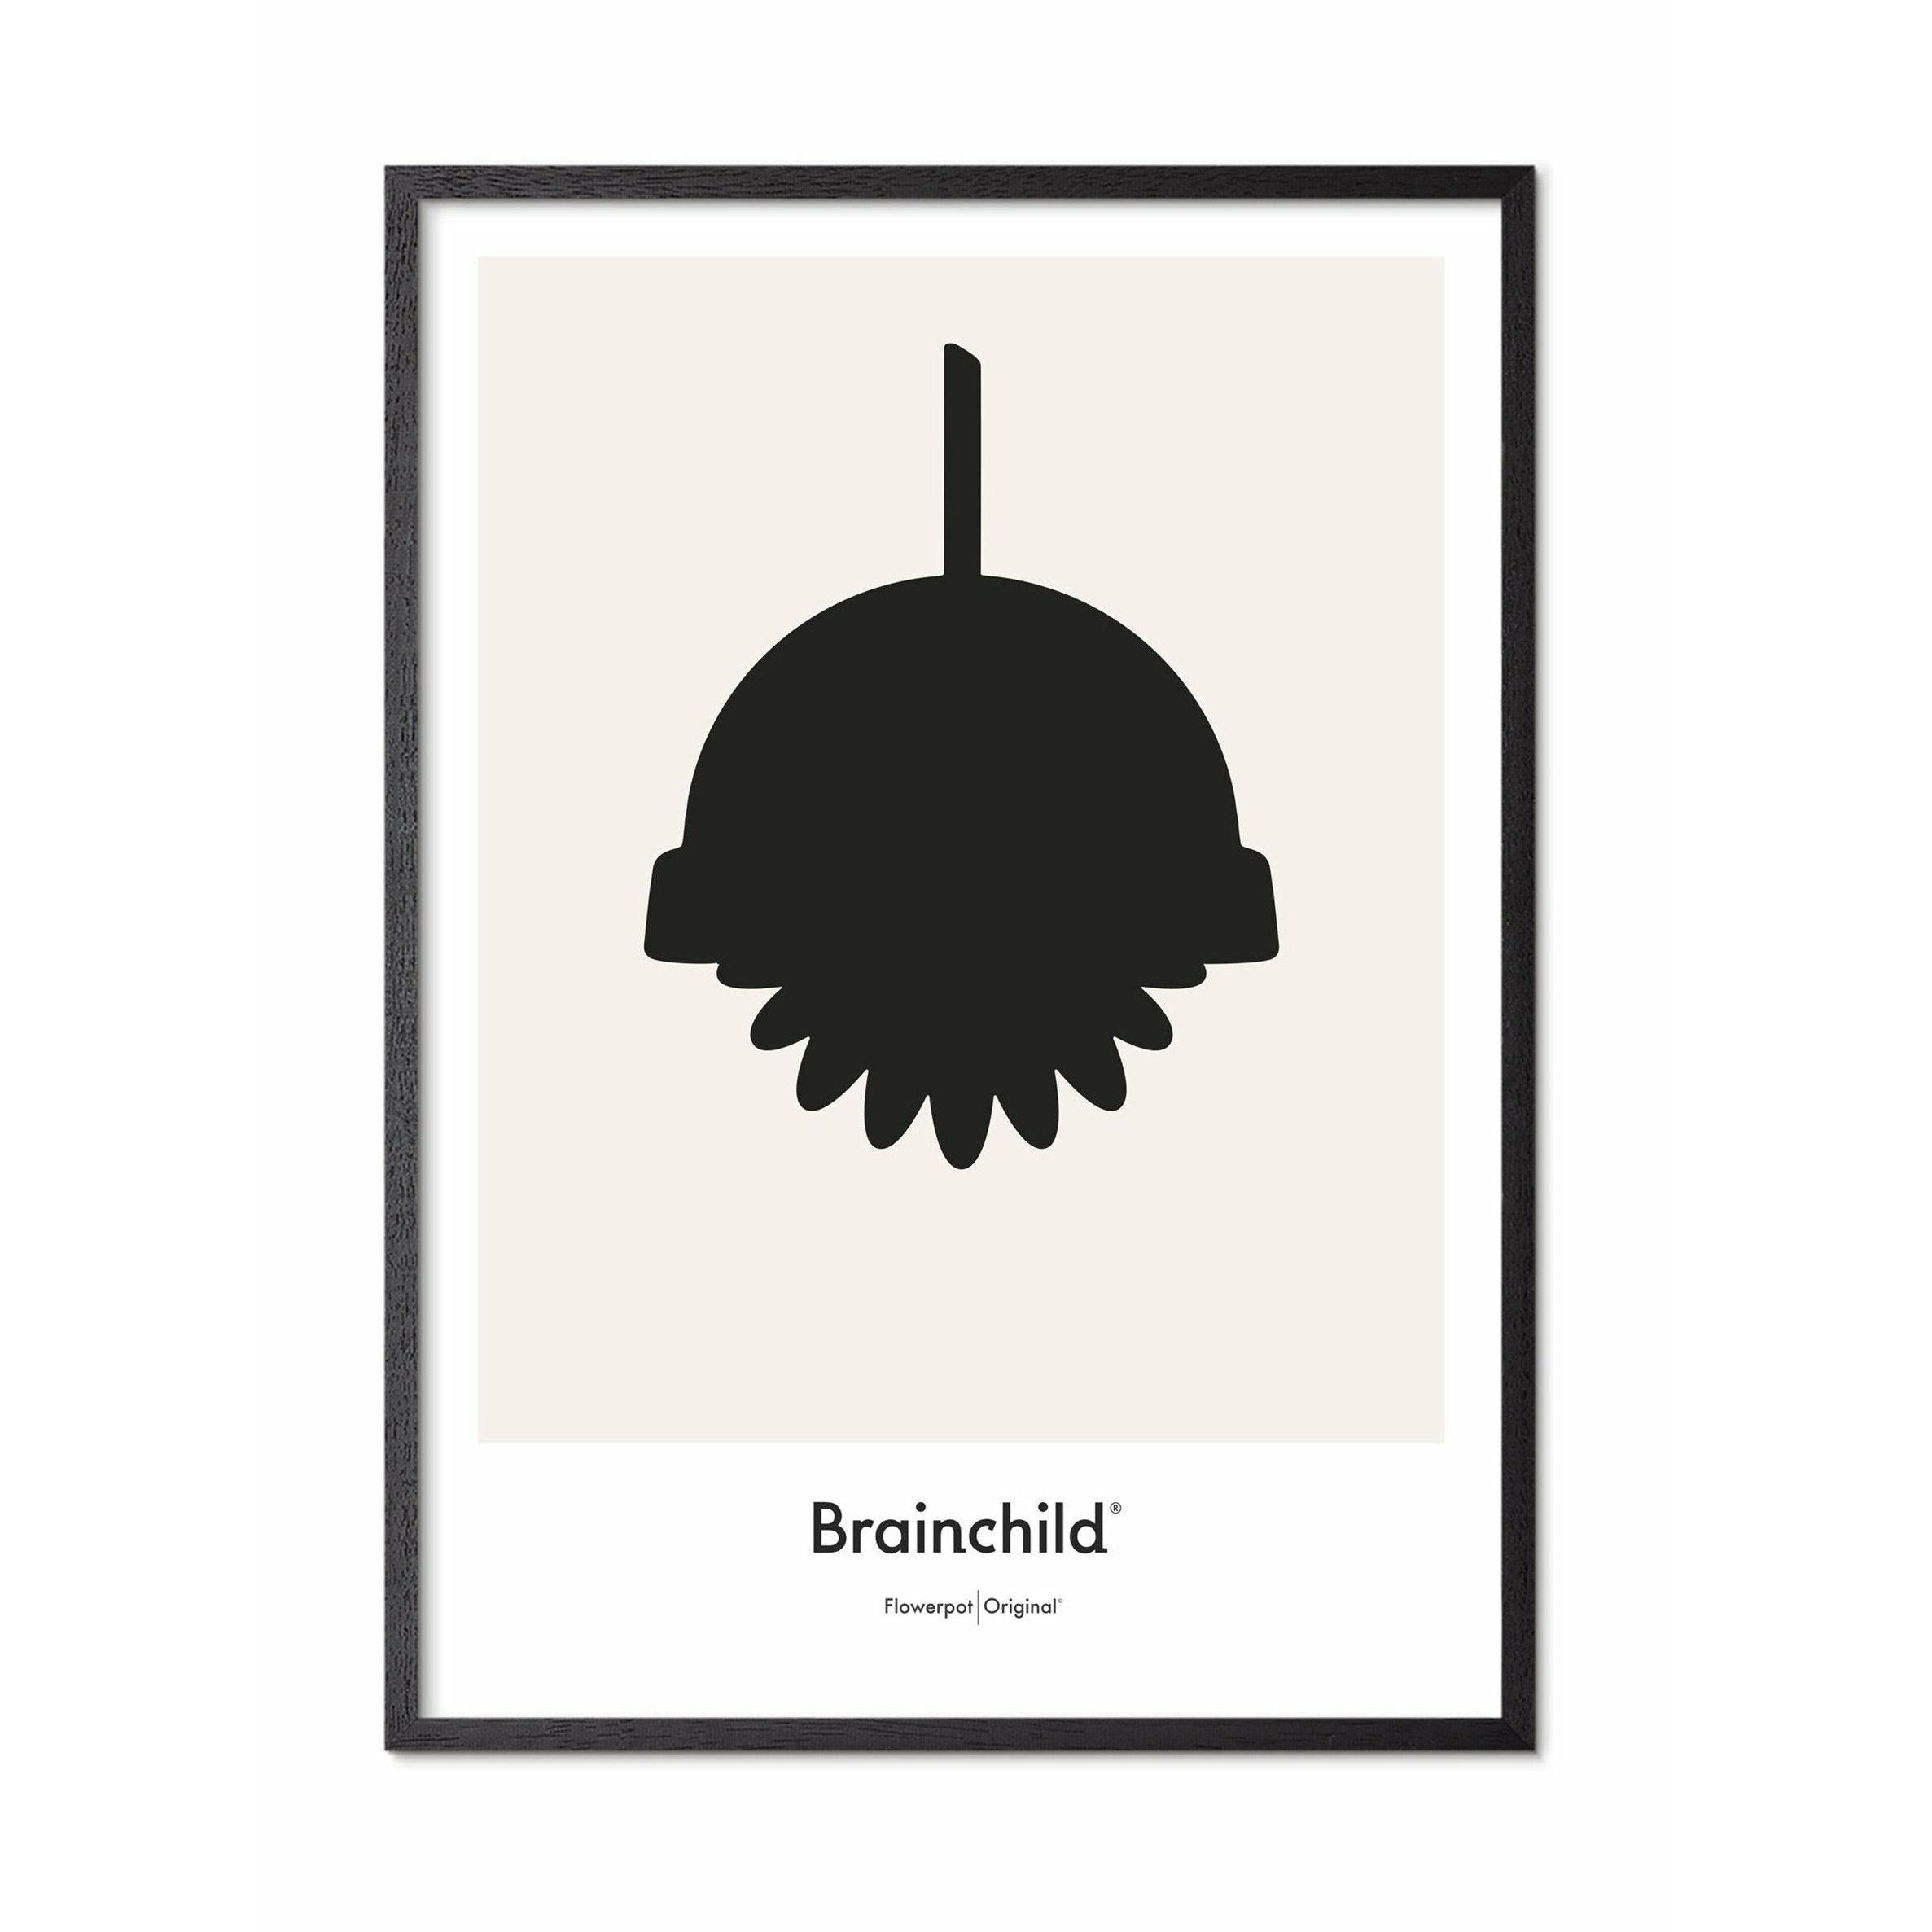 Brainchild Flower Pot Design Icon Poster, Frame Made Of Black Lacquered Wood 50x70 Cm, Grey